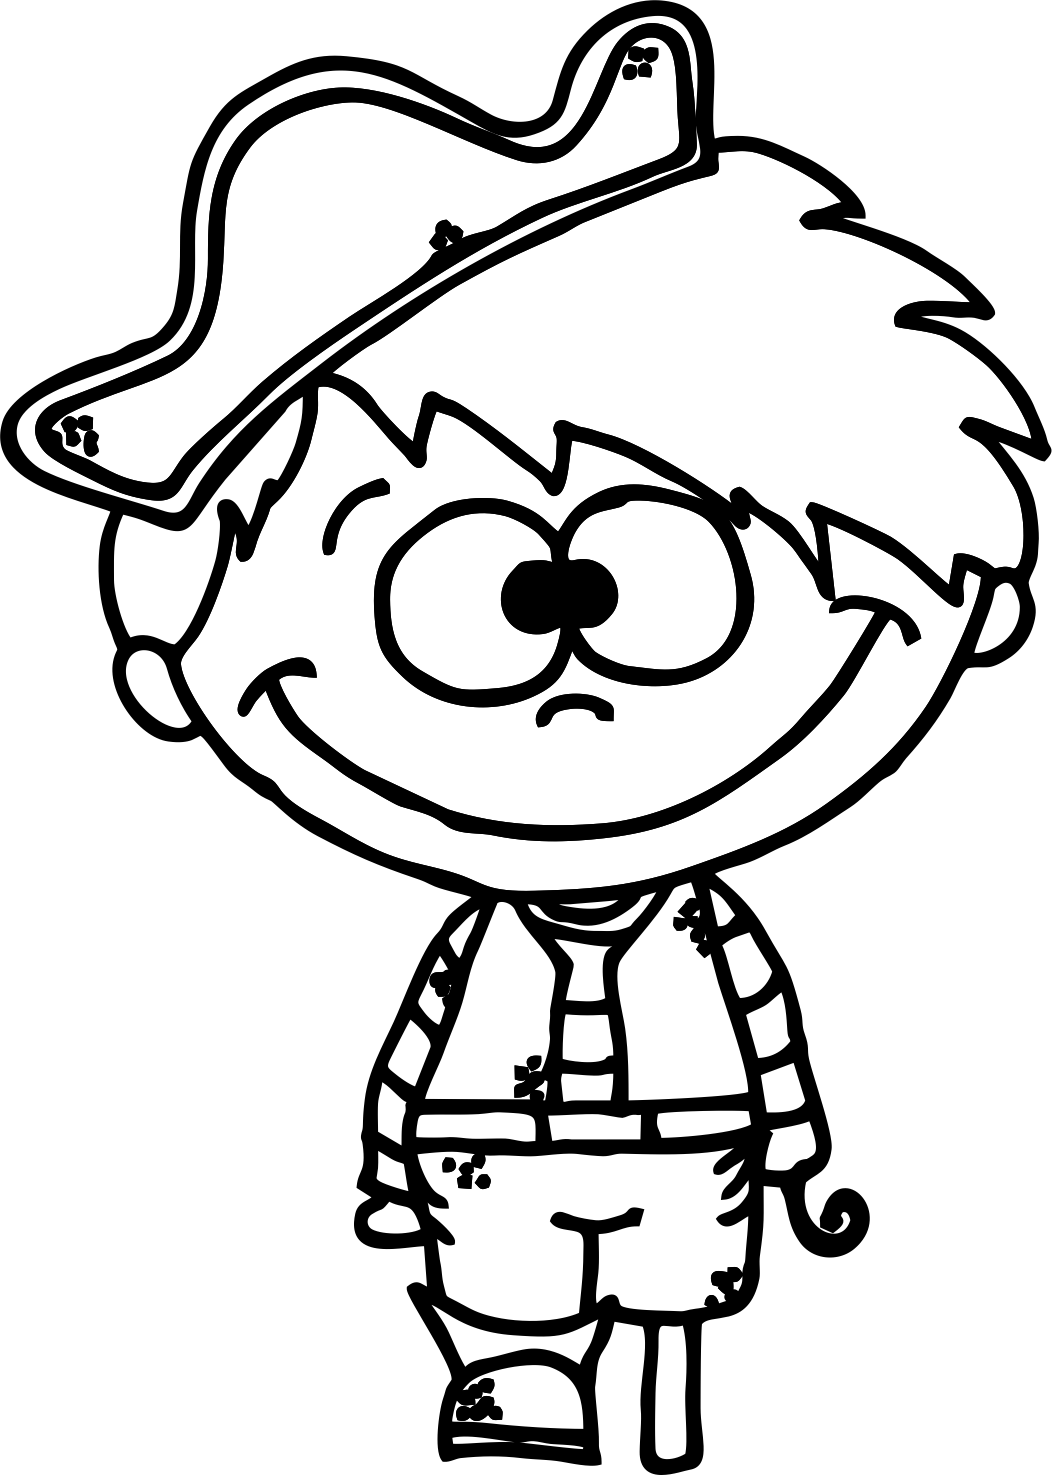 I Am Finally Getting This Dream Of Having A Successful - Successful Png Cartoon Black White (1052x1476)